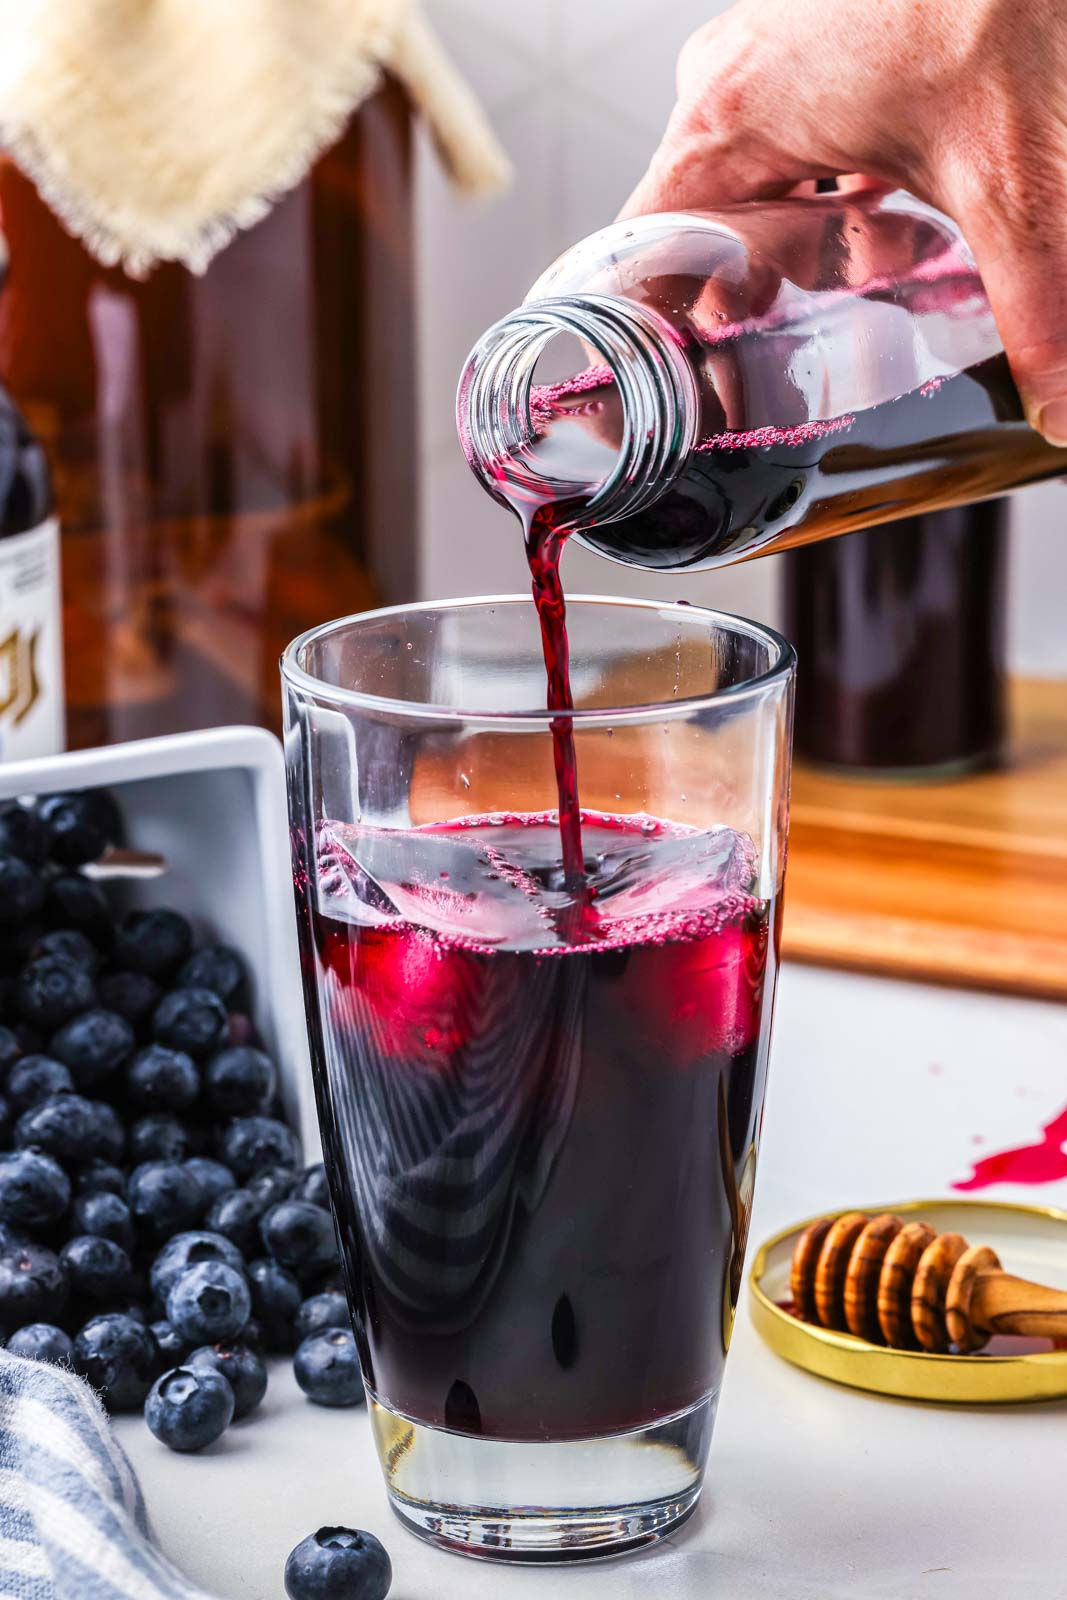 a cup being filled with blueberry kombucha being poured from a narrow jar